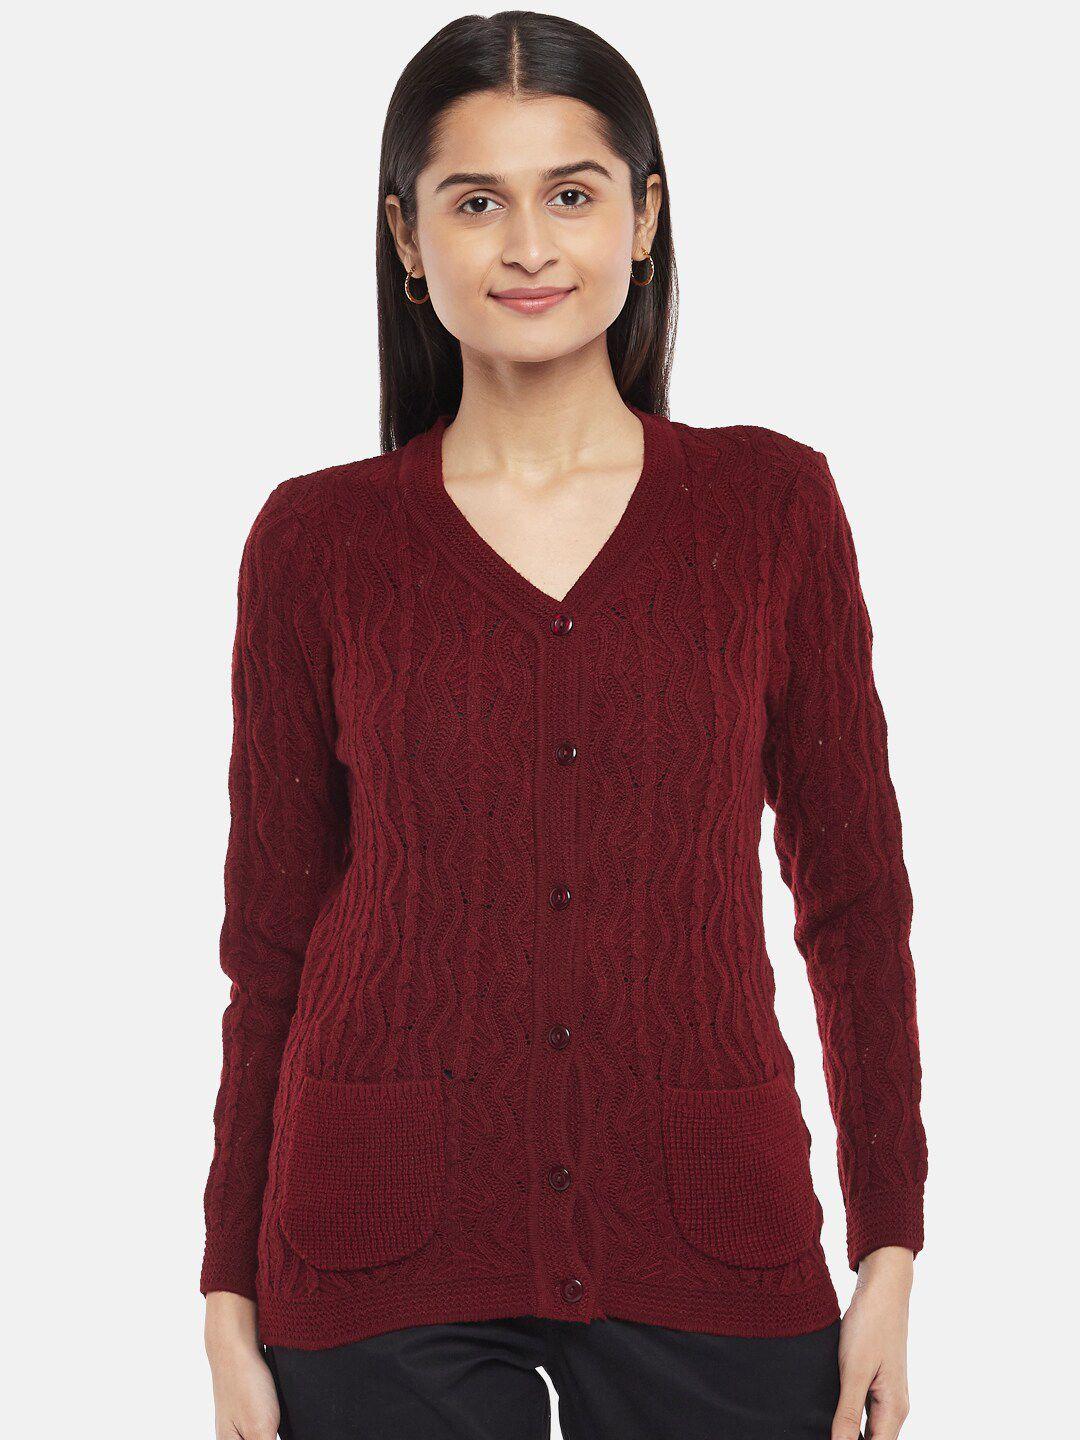 honey by pantaloons women red cable knit pure acrylic cardigan